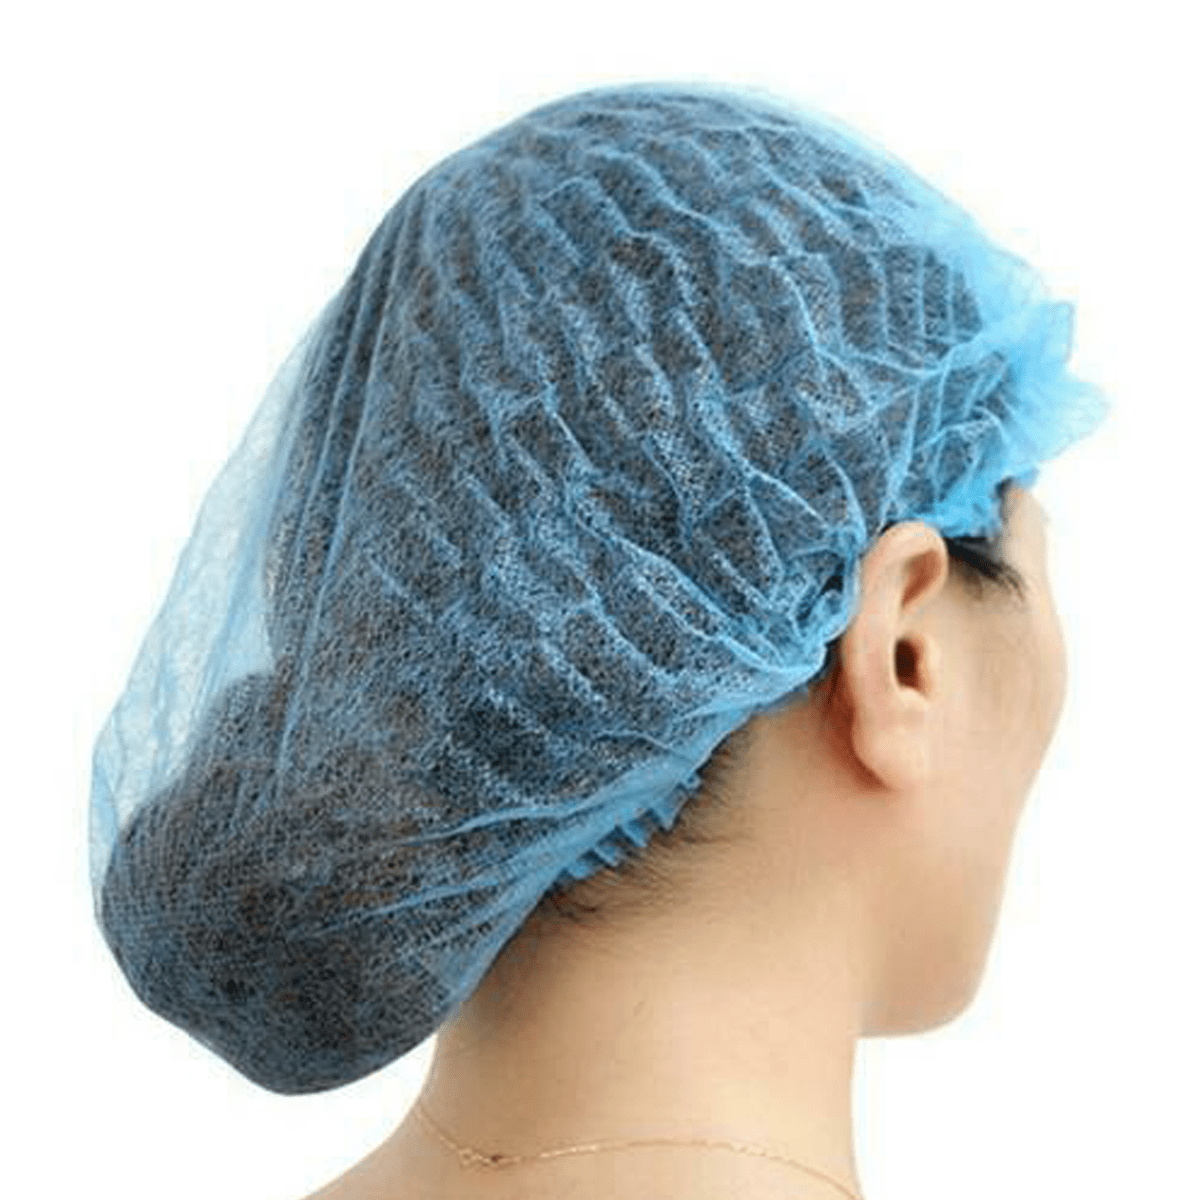 Disposable Medical Caps Make up Supply Bath Cover Hairnet White Blue Green 